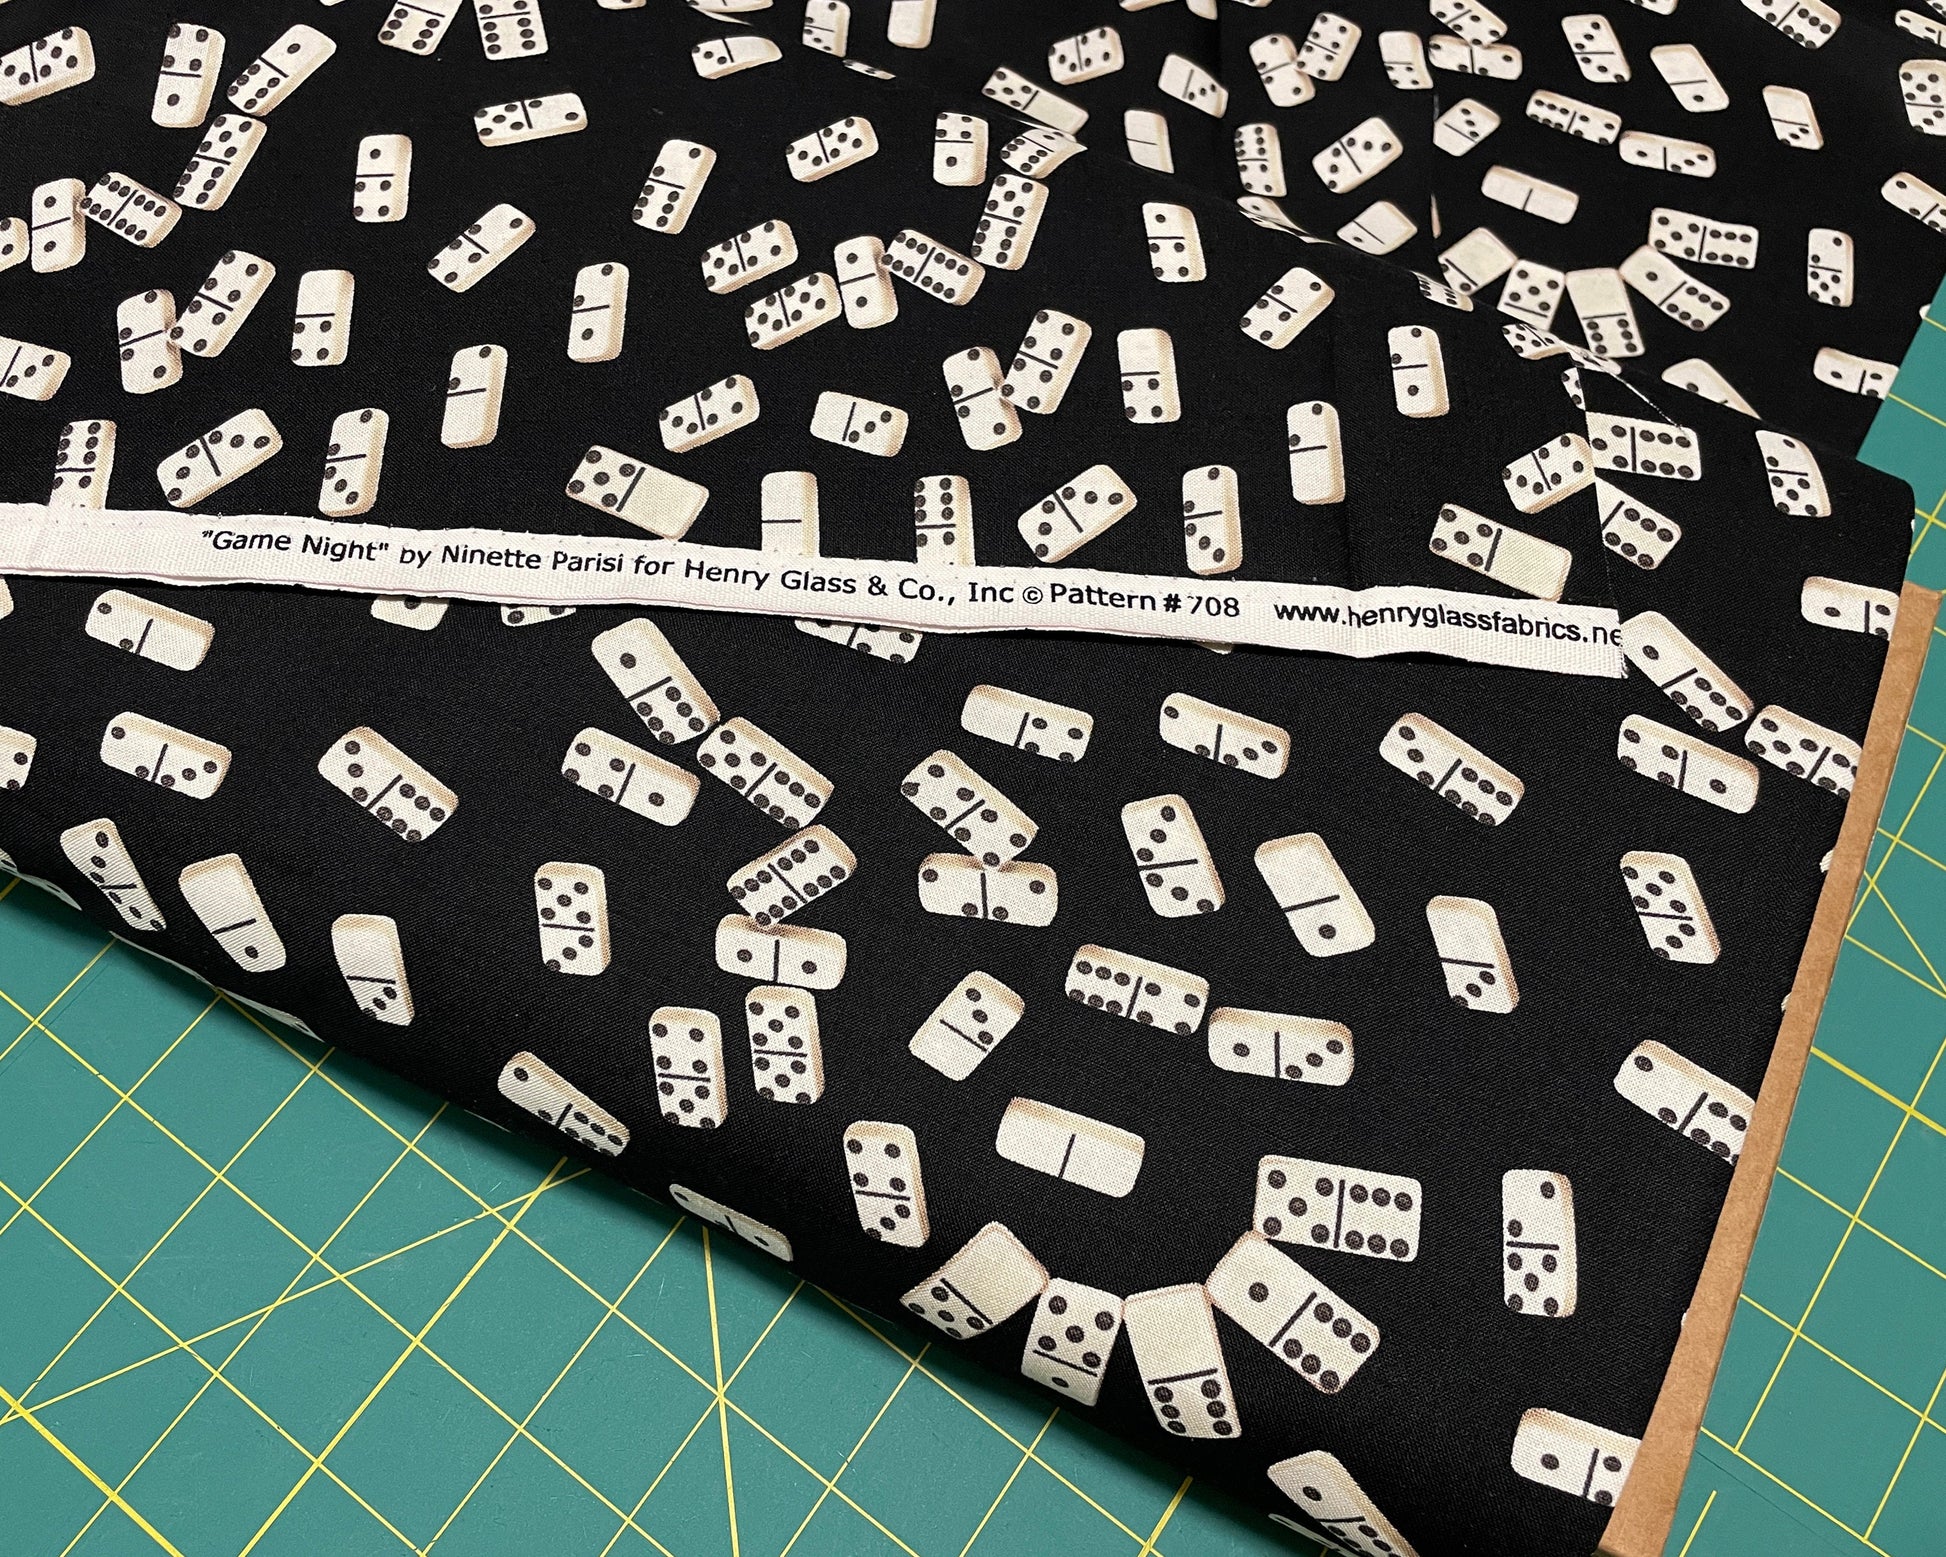 Domino fabric by the yard - NEW - Henry Glass Game Night Collection - 100% Cotton - Family Game Print Game Hobby material - SHIPS NEXT Day